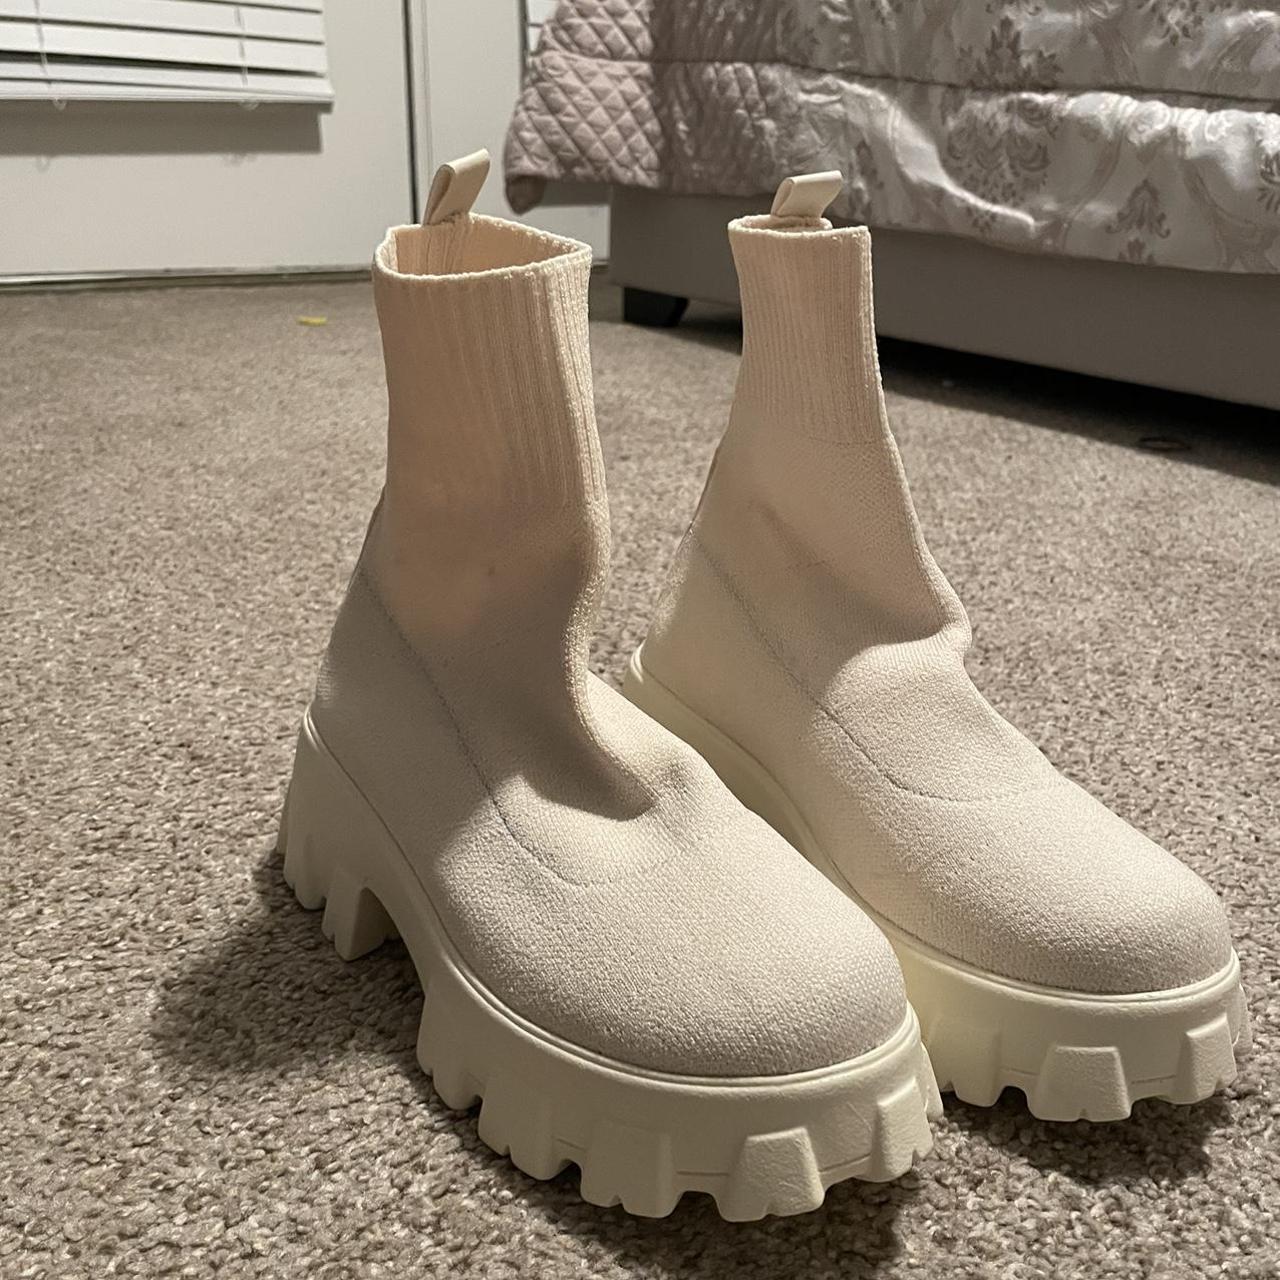 EGO Women's White and Cream Boots